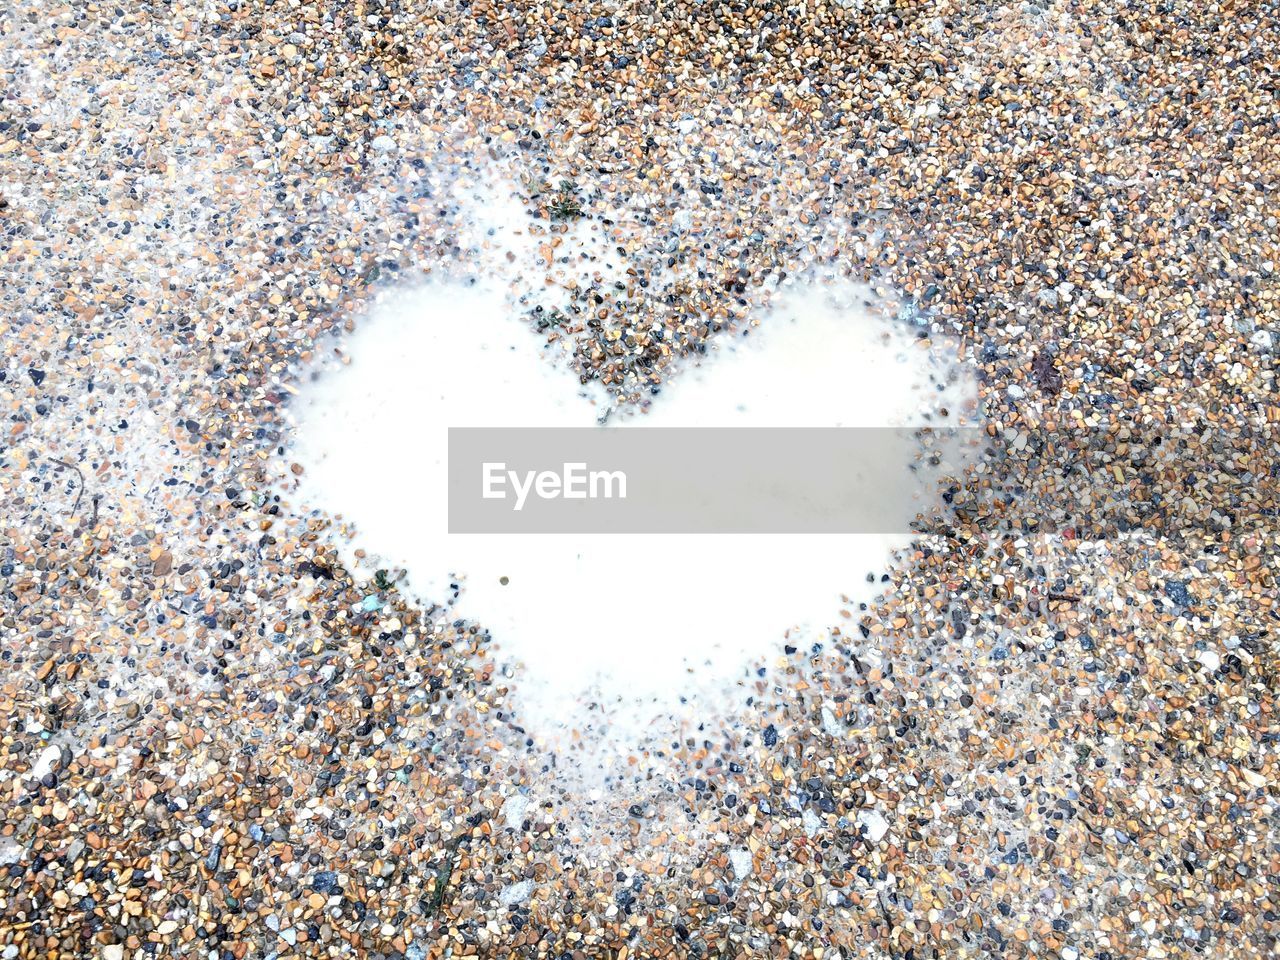 CLOSE-UP OF HEART SHAPE MADE OF STONE WALL